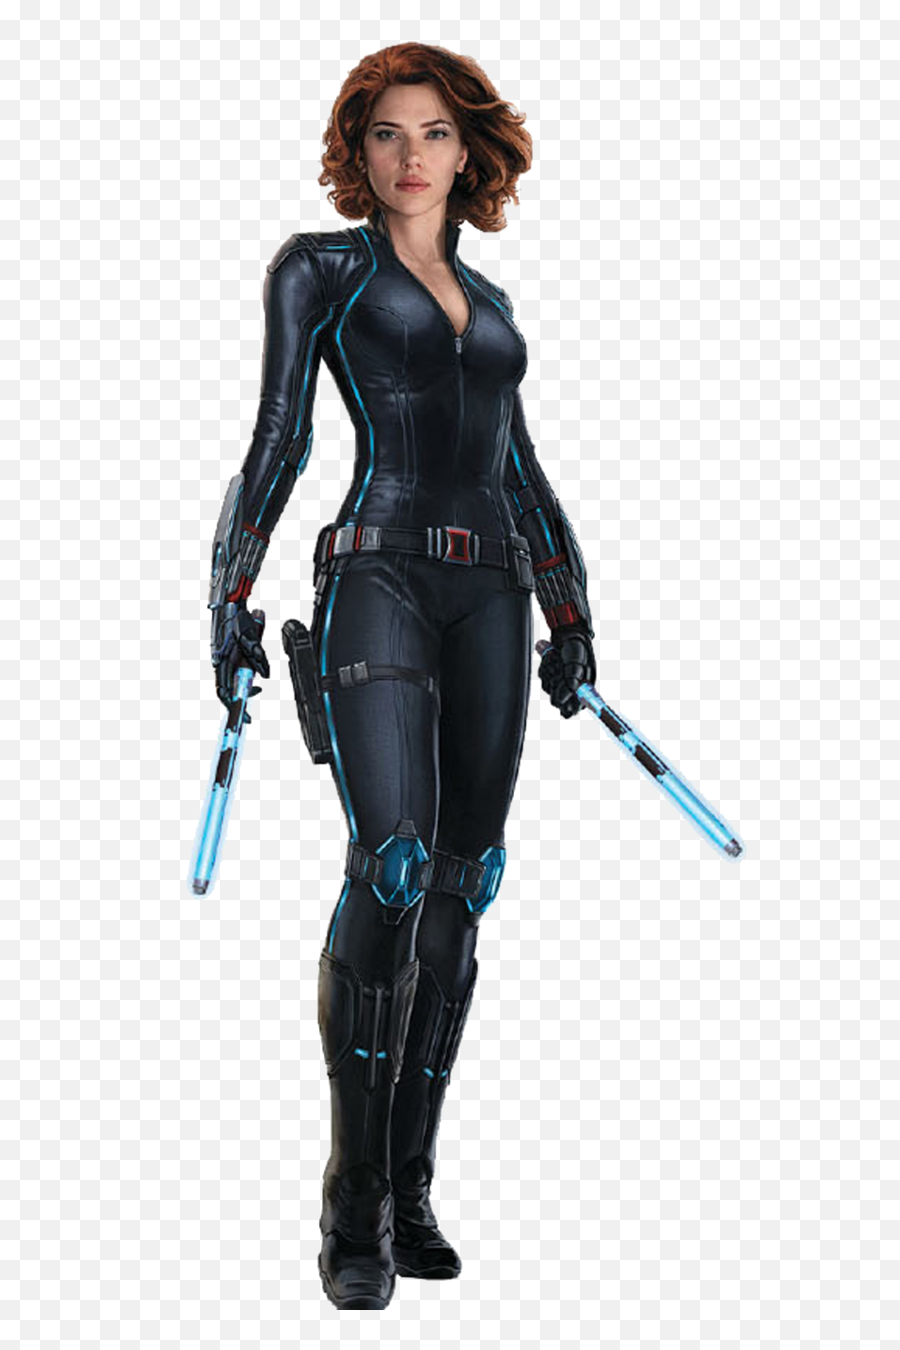 Download Black Widow Hq Png Image In - Black Widow Age Of Ultron,Black Widow Png